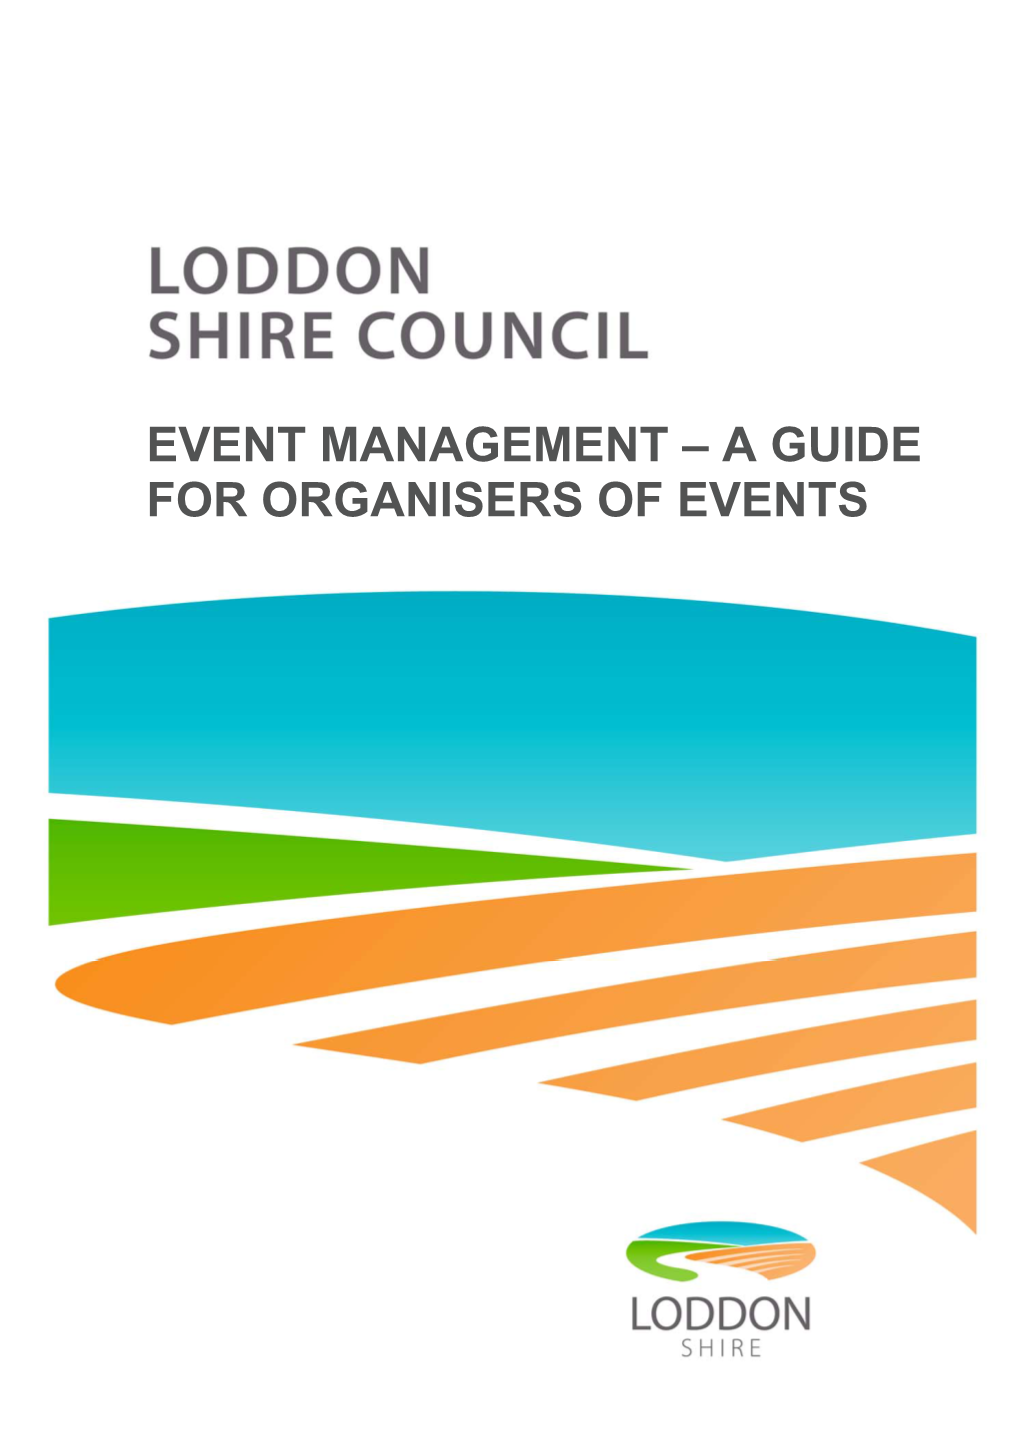 Event Management – a Guide for Organisers of Events Document Information